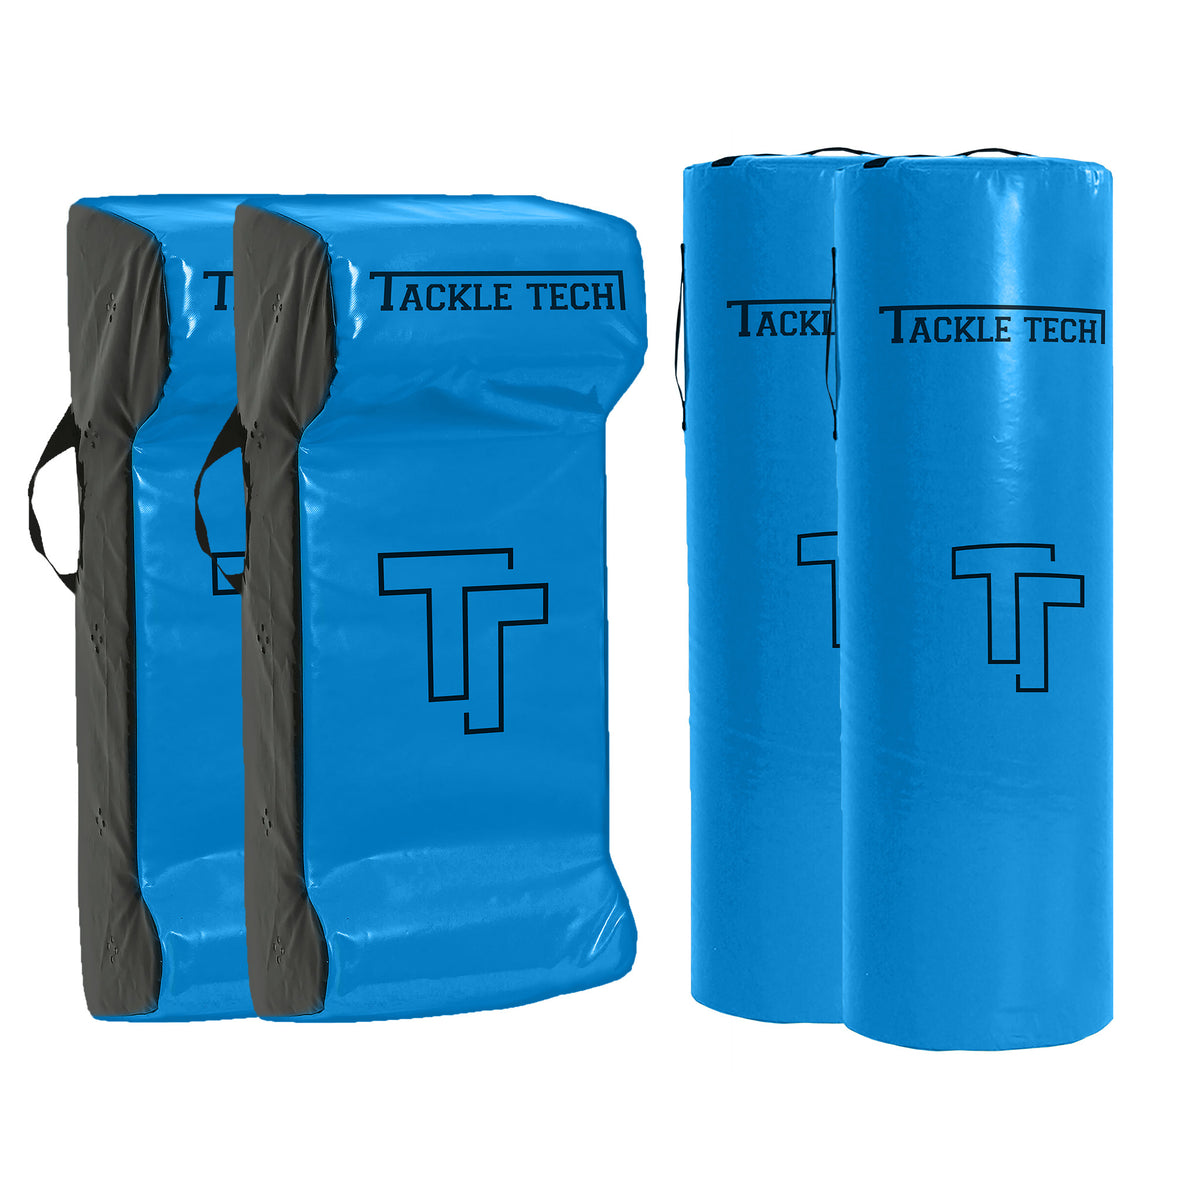 Tackle Tech Team Bundle. Two TACKLE TECH SENIOR CONTACT SHIELD - CLUB SERIES and two  TACKLE TECH SENIOR TACKLE BAG - CLUB SERIES